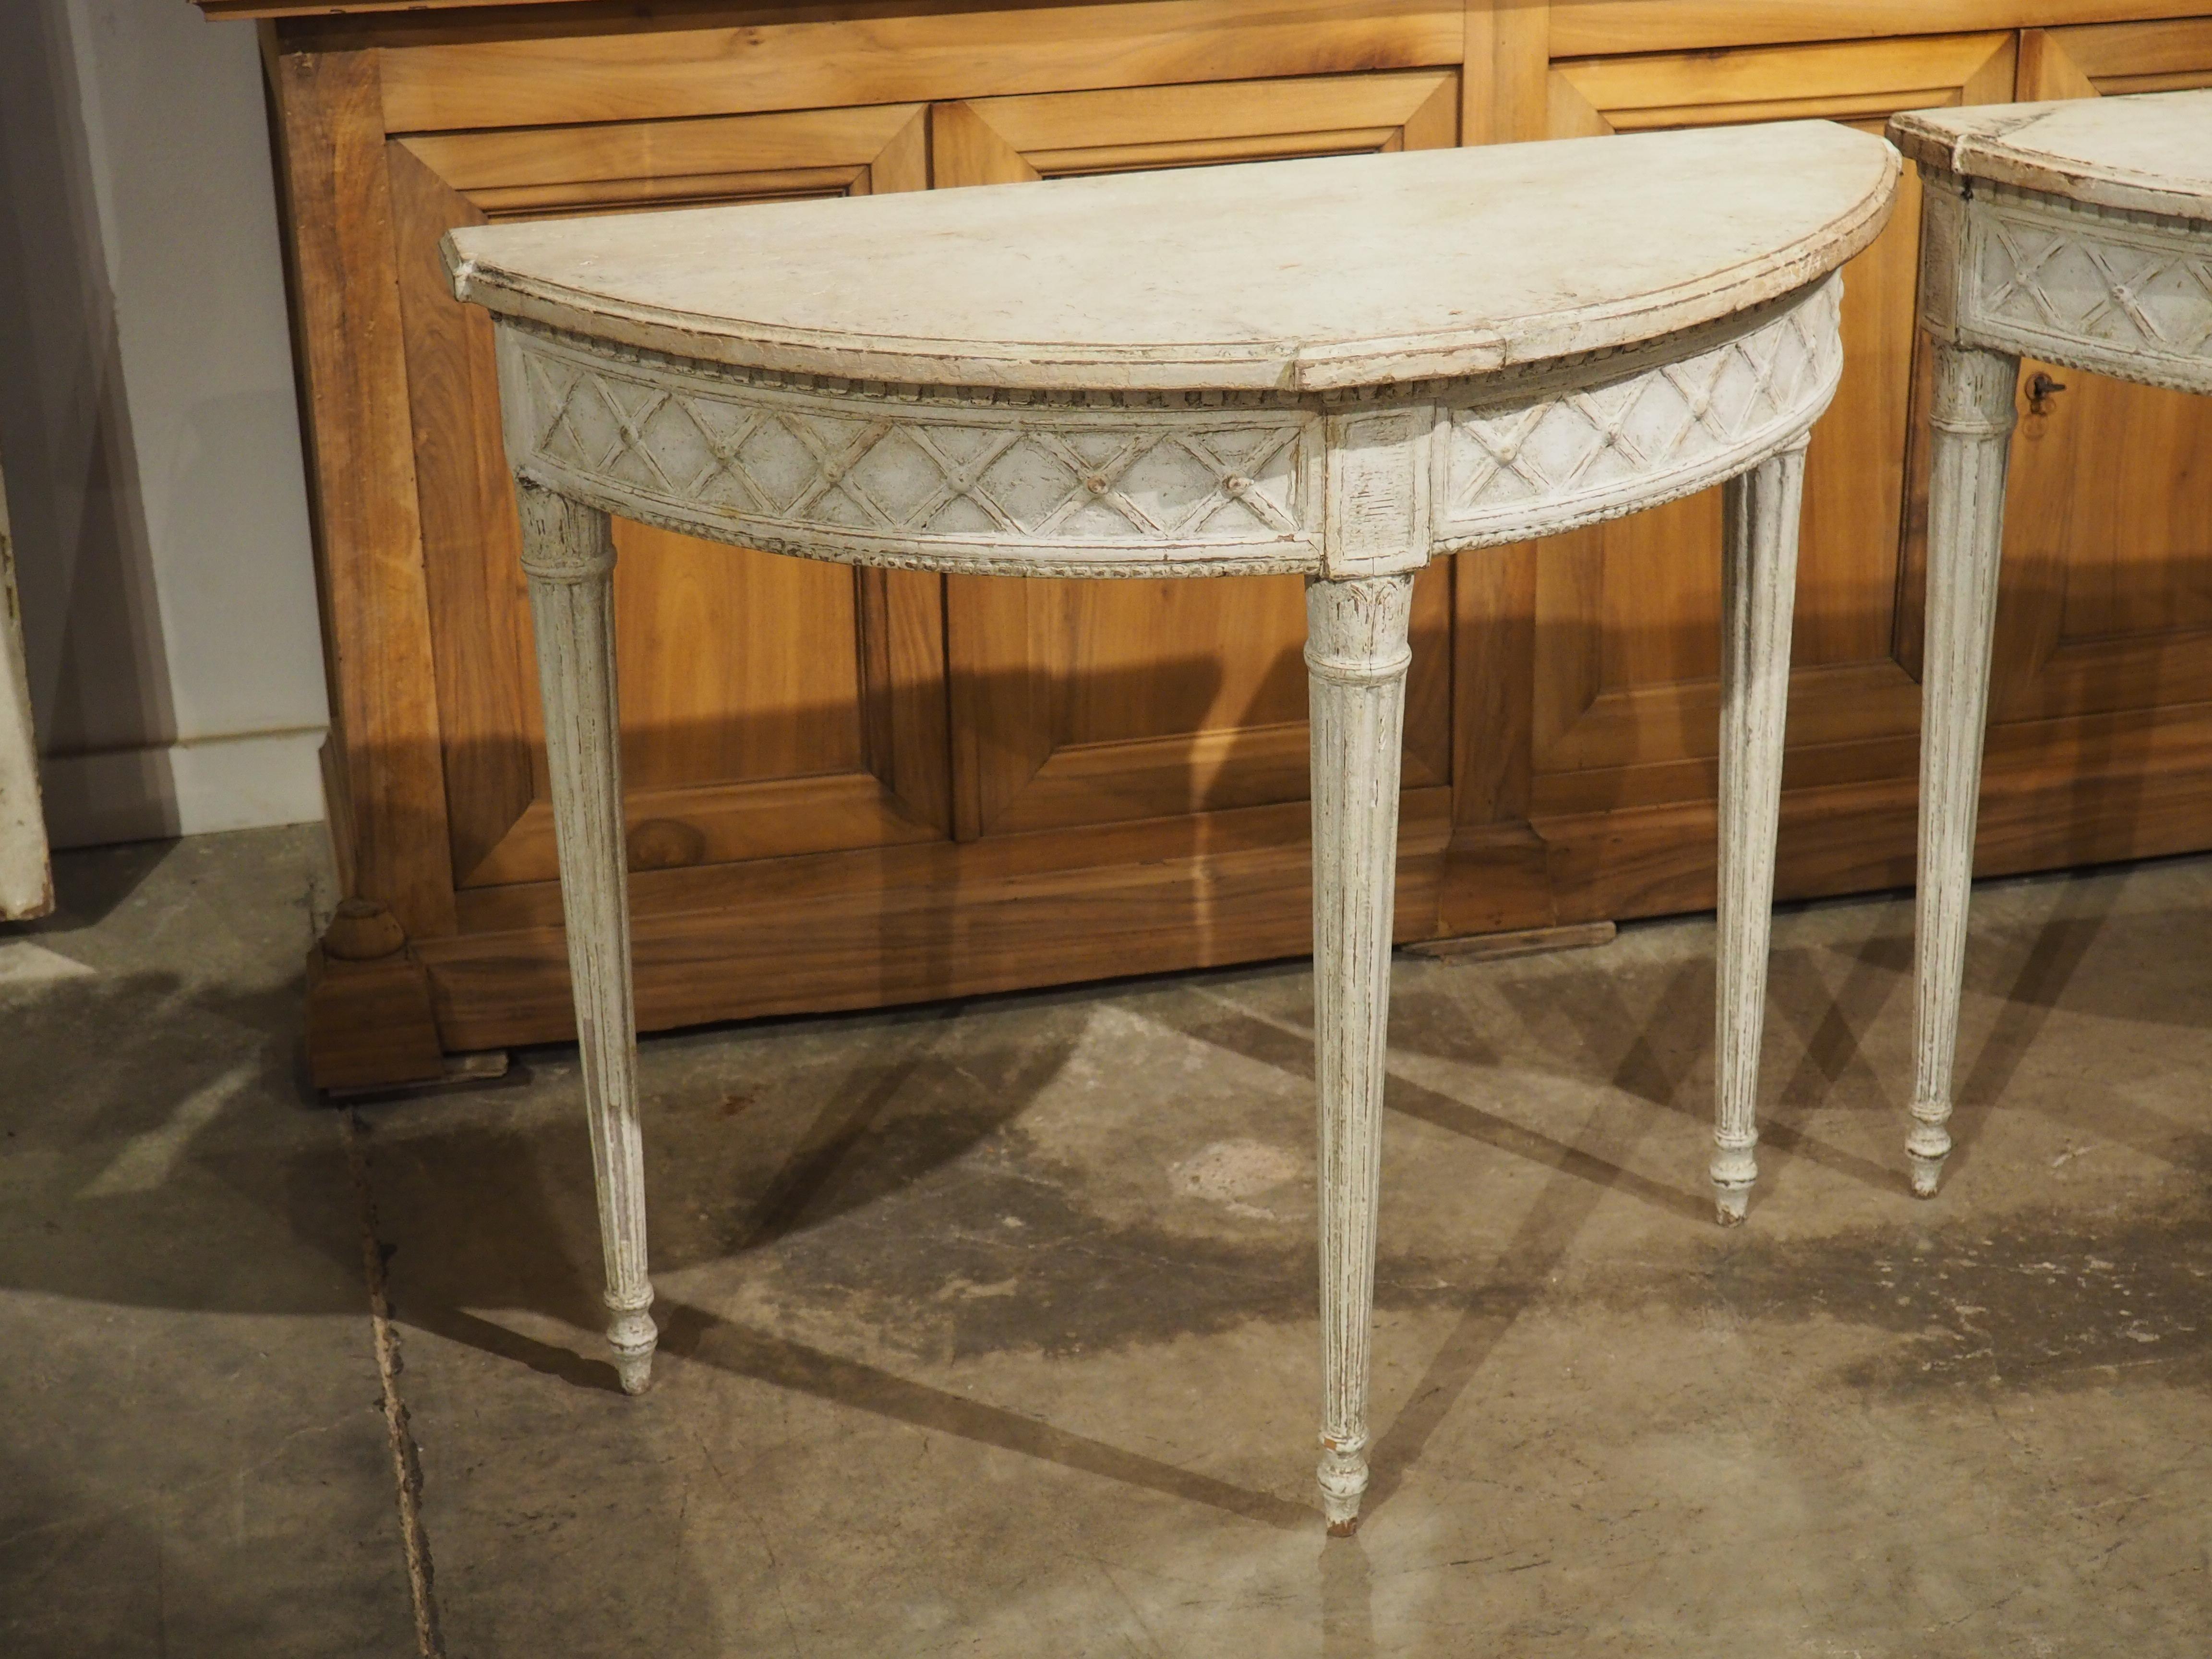 This pair of painted demi-lune tables were hand-carved, circa 1880s, in France in the style of Louis XVI. The statuesque tables feature a more recent white finish with areas that have developed a gray patination.

True to the style that prevailed